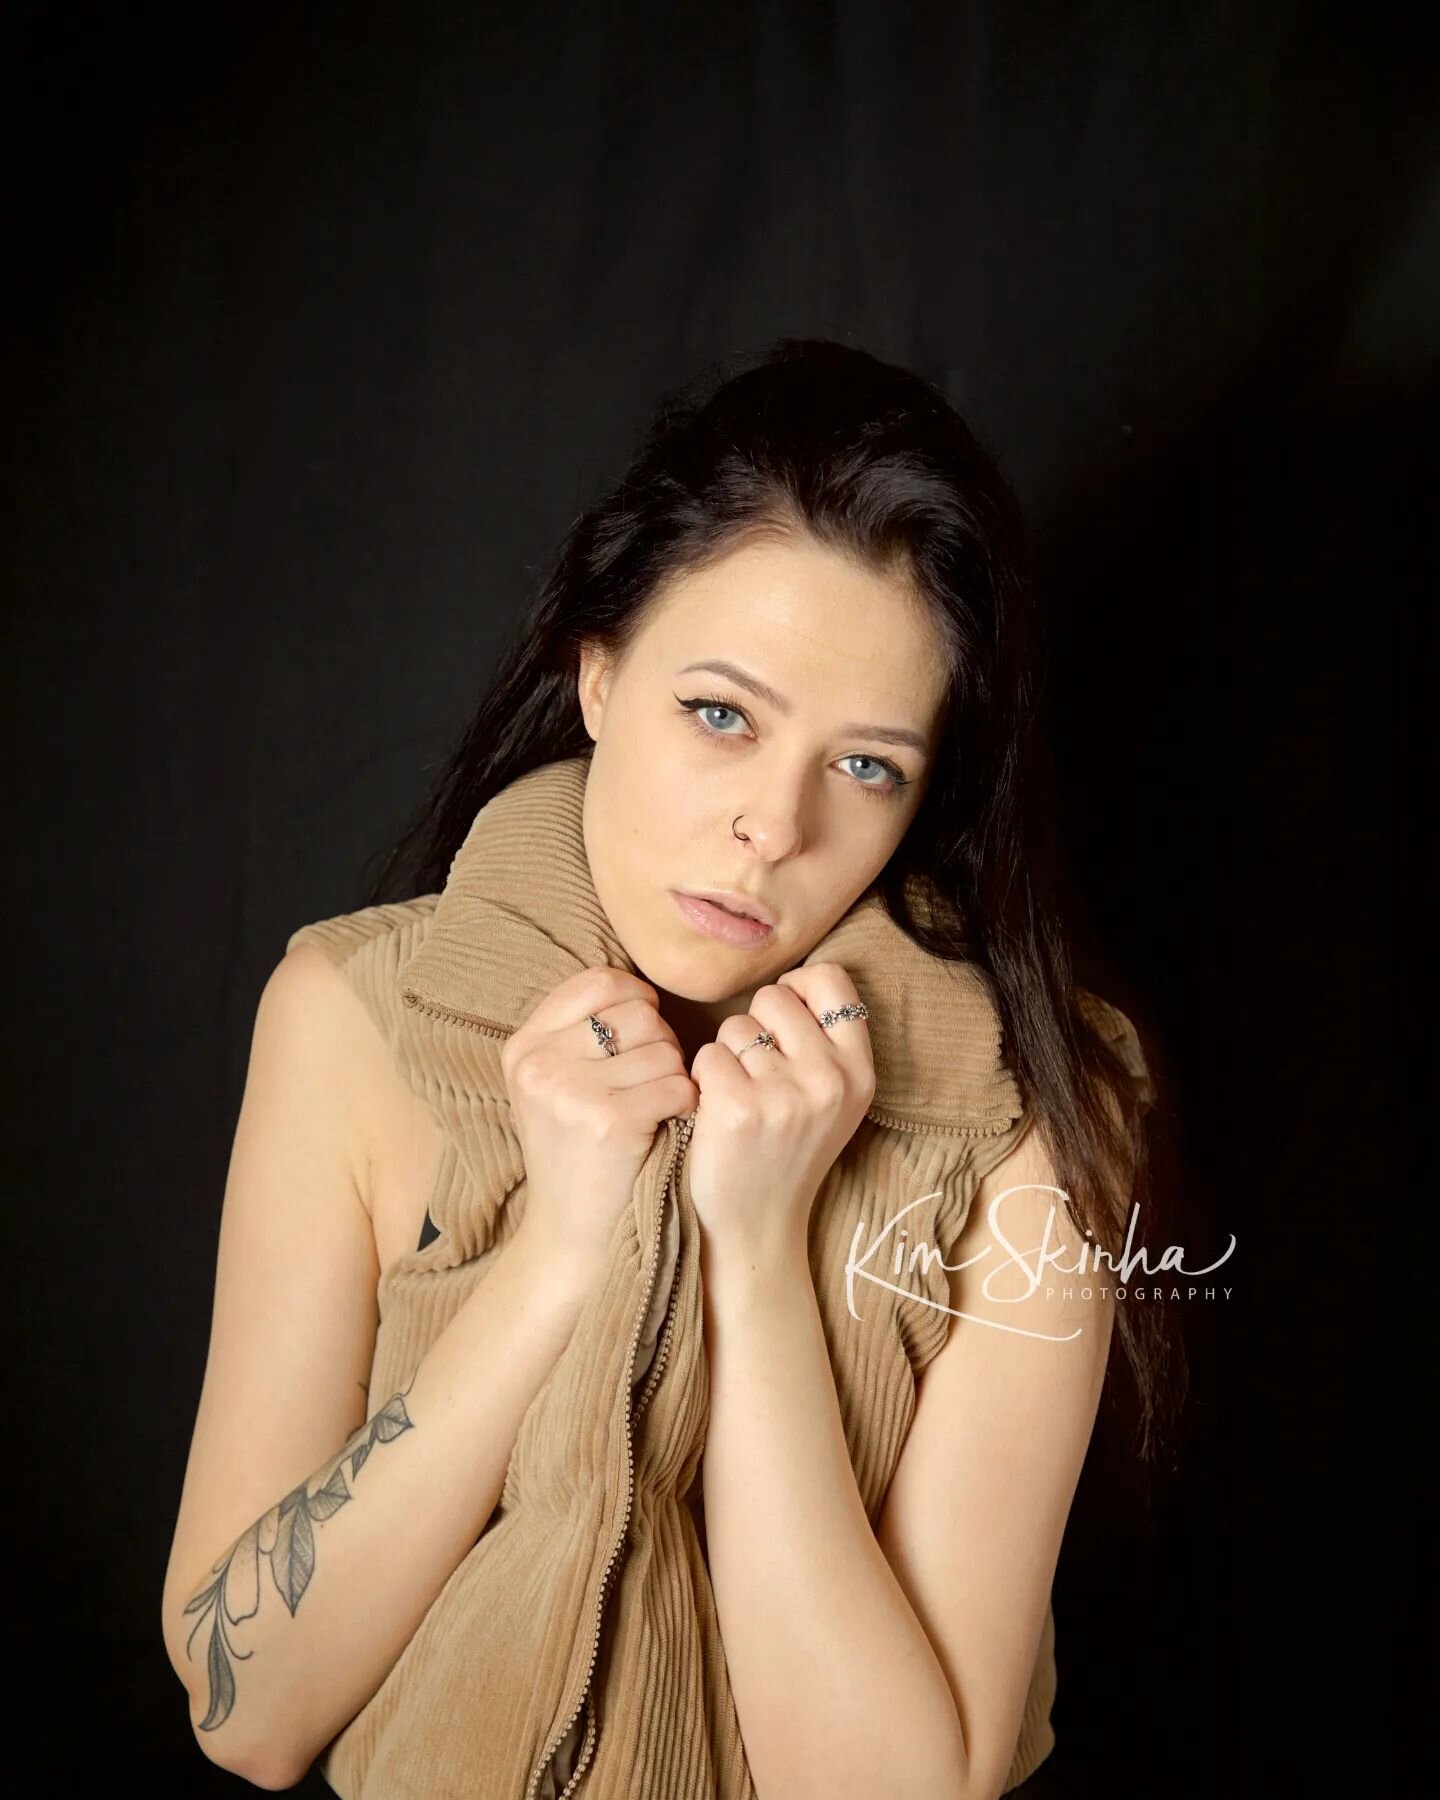 Alley's sneak peek and a few of my favorite shots from our studio time!